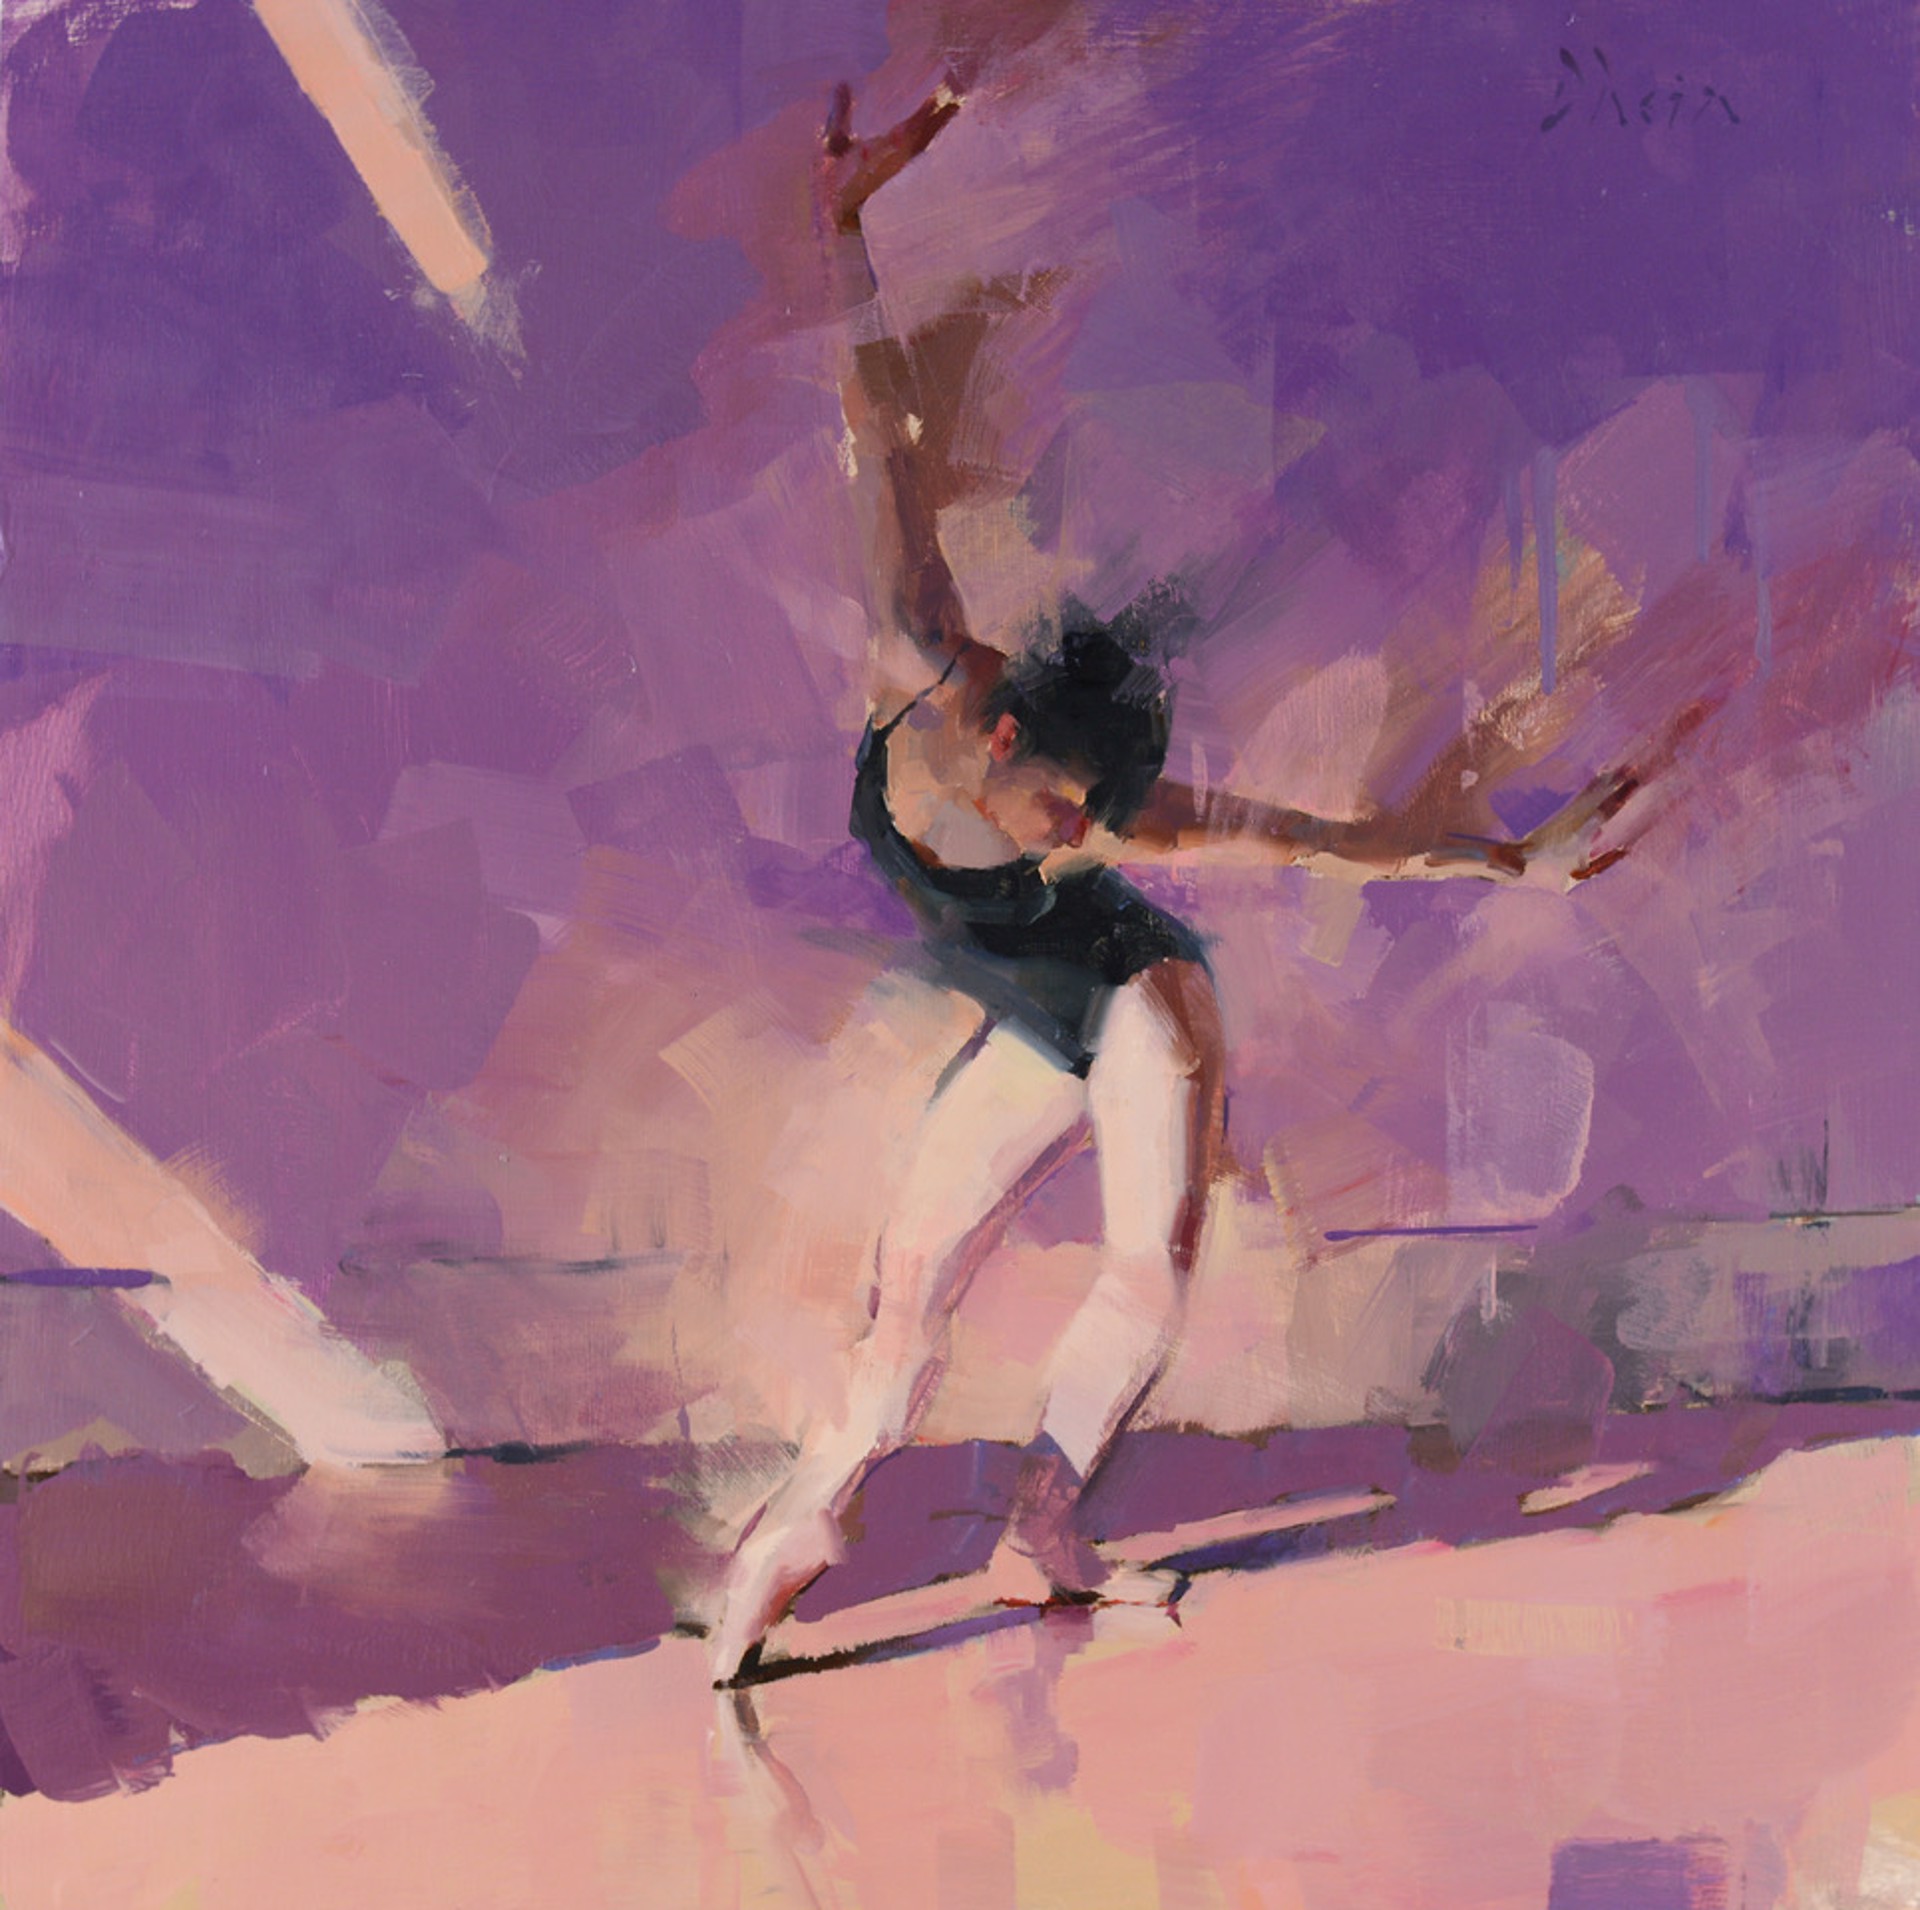 Dancer in the Morning Light by Jacob Dhein